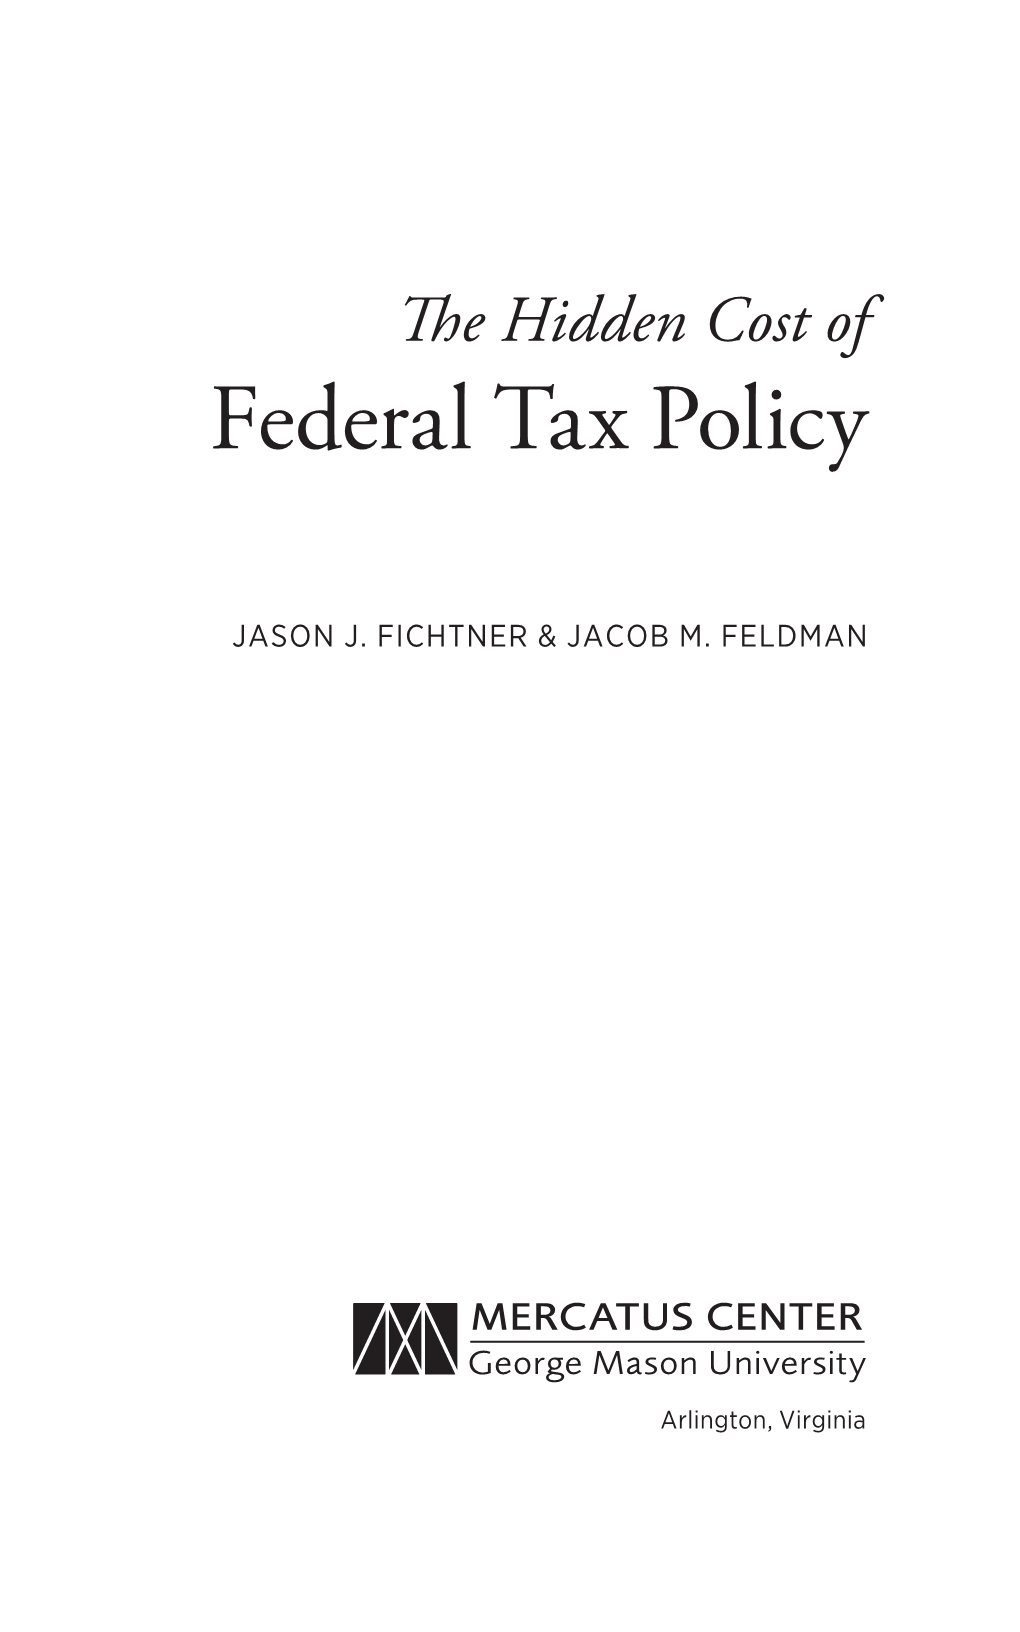 The Hidden Cost of Federal Tax Policy